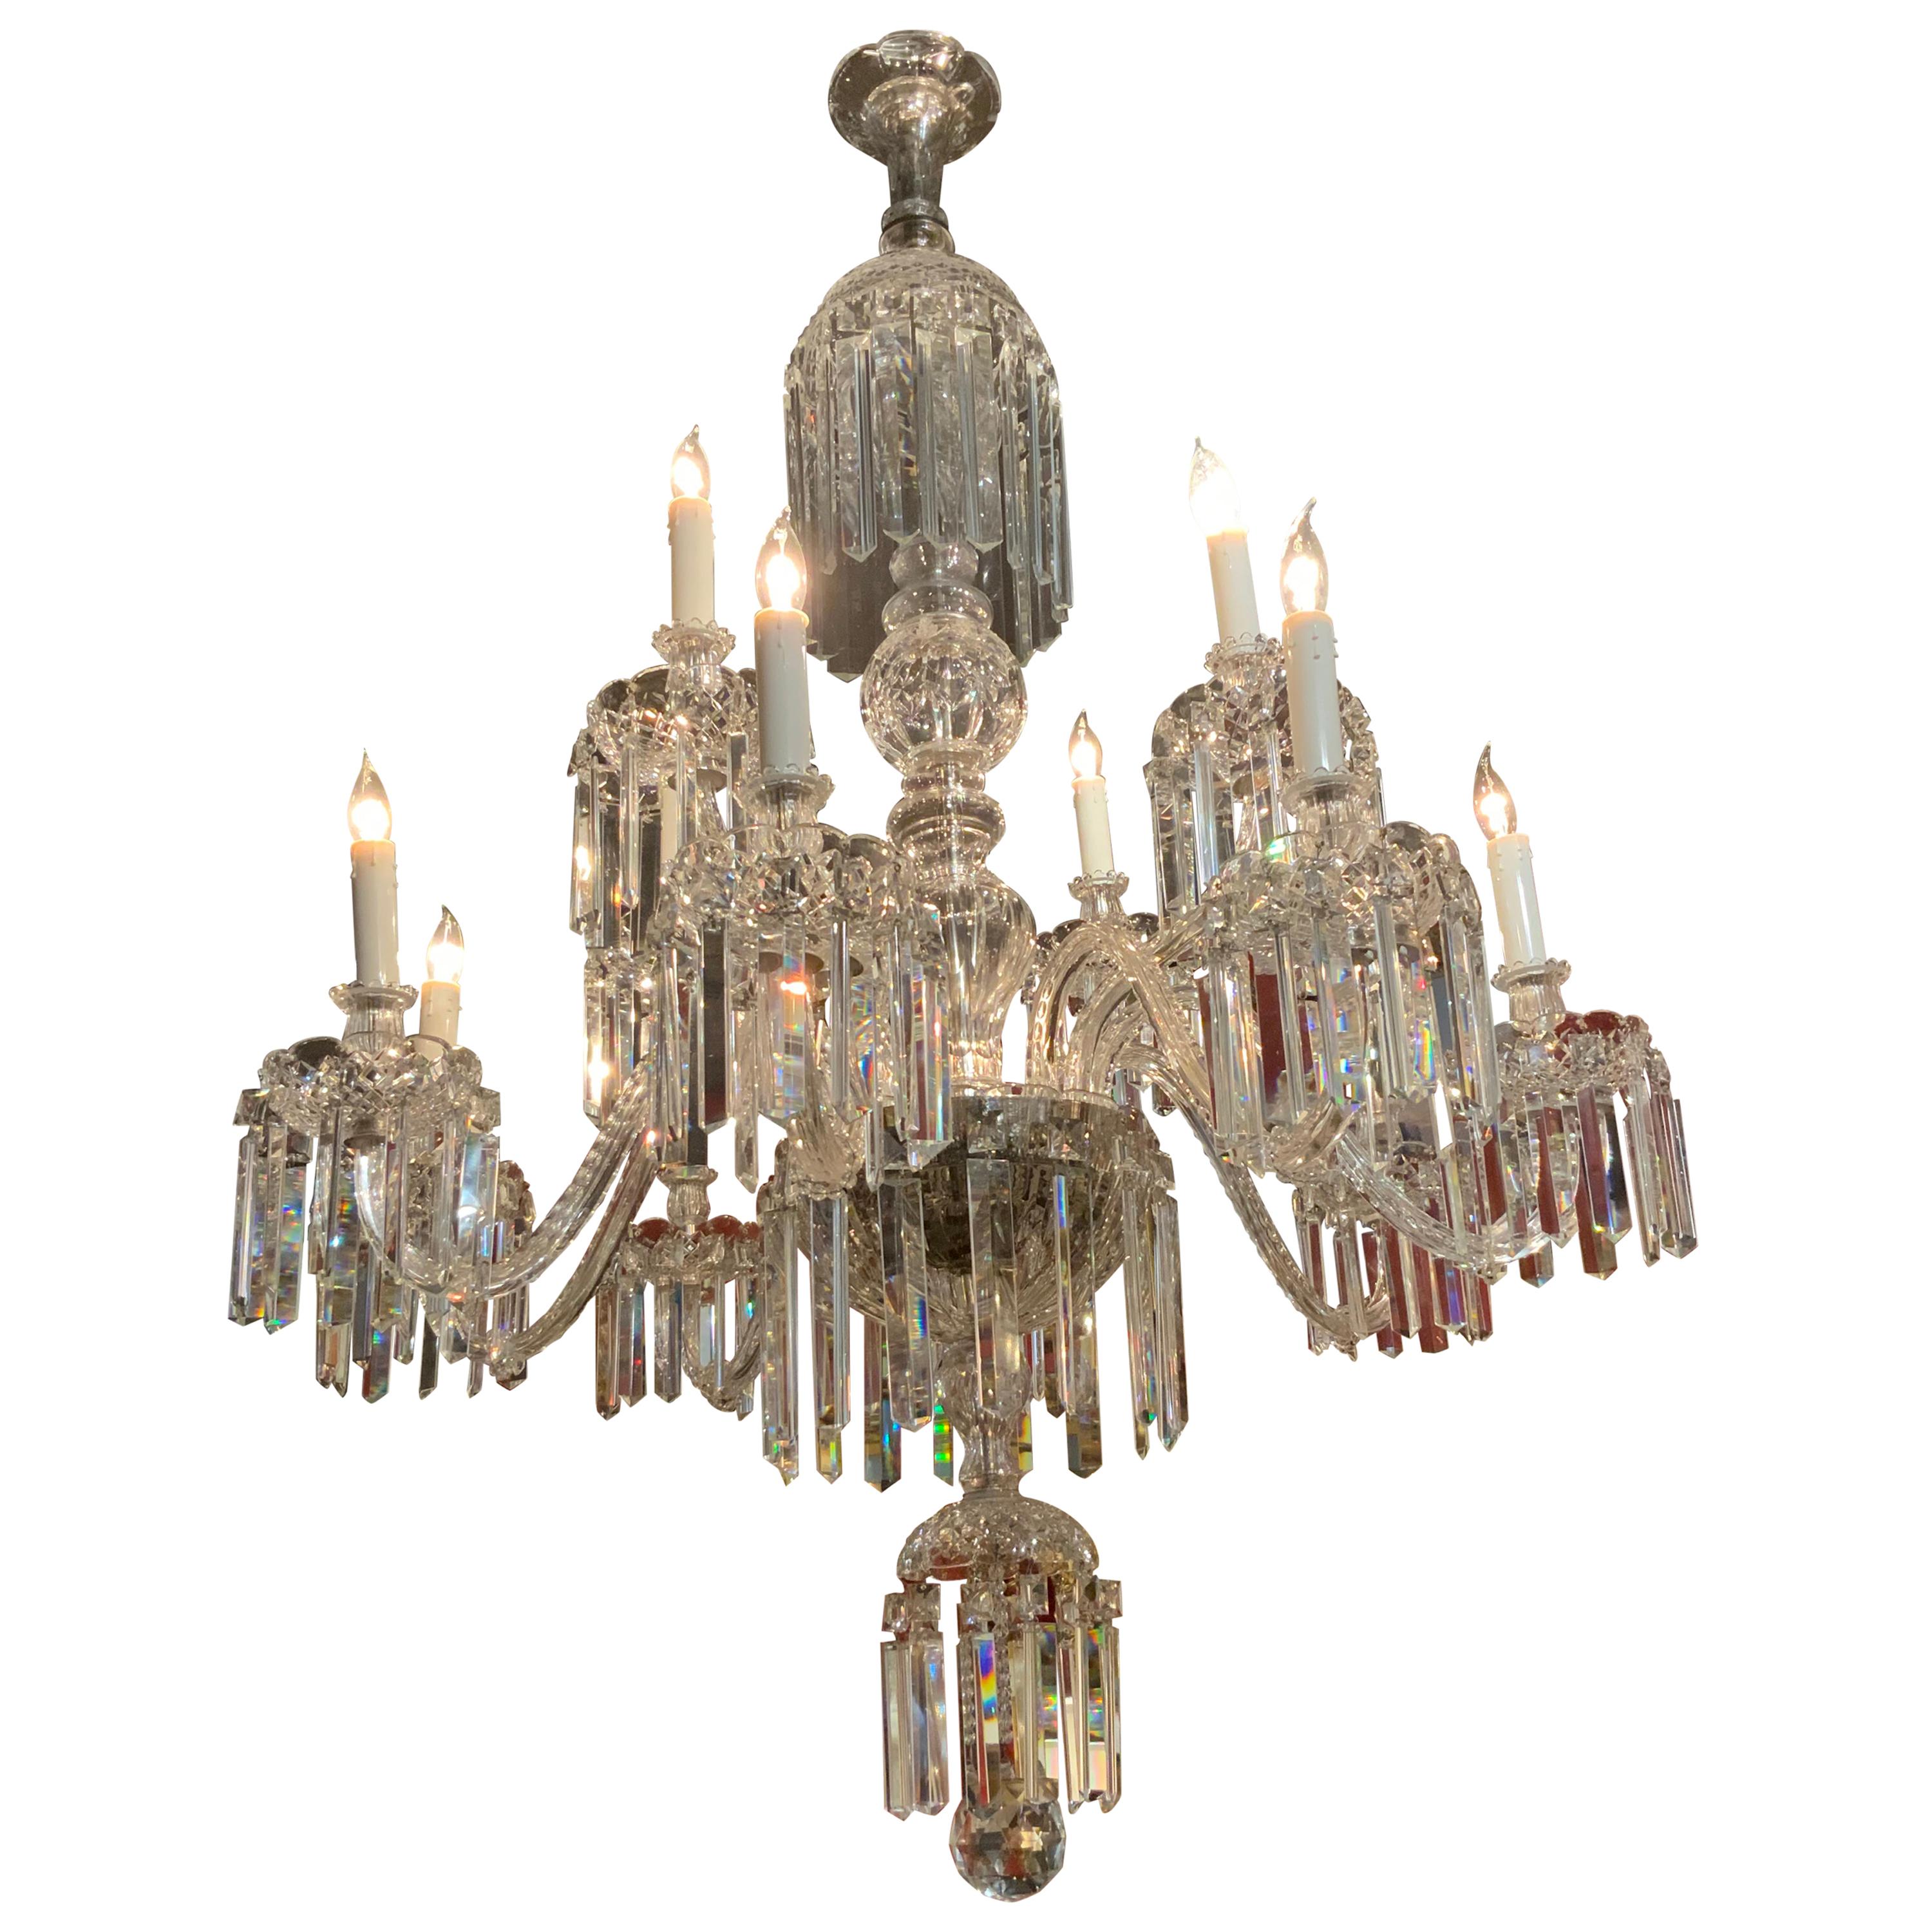 Crystal Chandelier with 12 Lights, Scrolling Arms, Large and Superior Condition